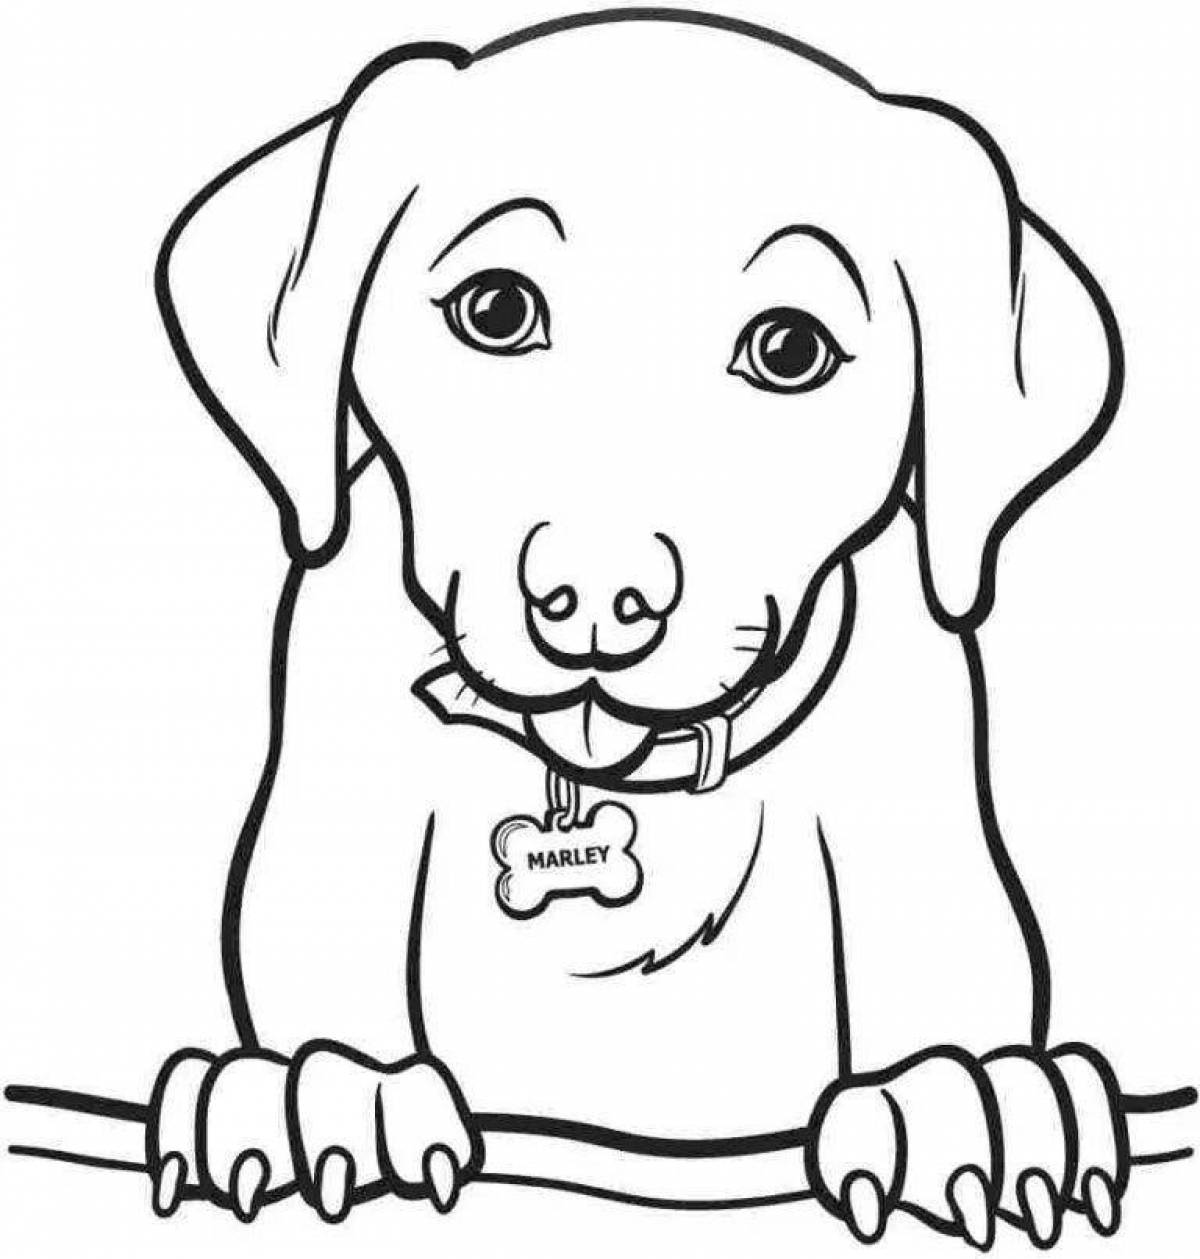 Colourful animal dog coloring pages